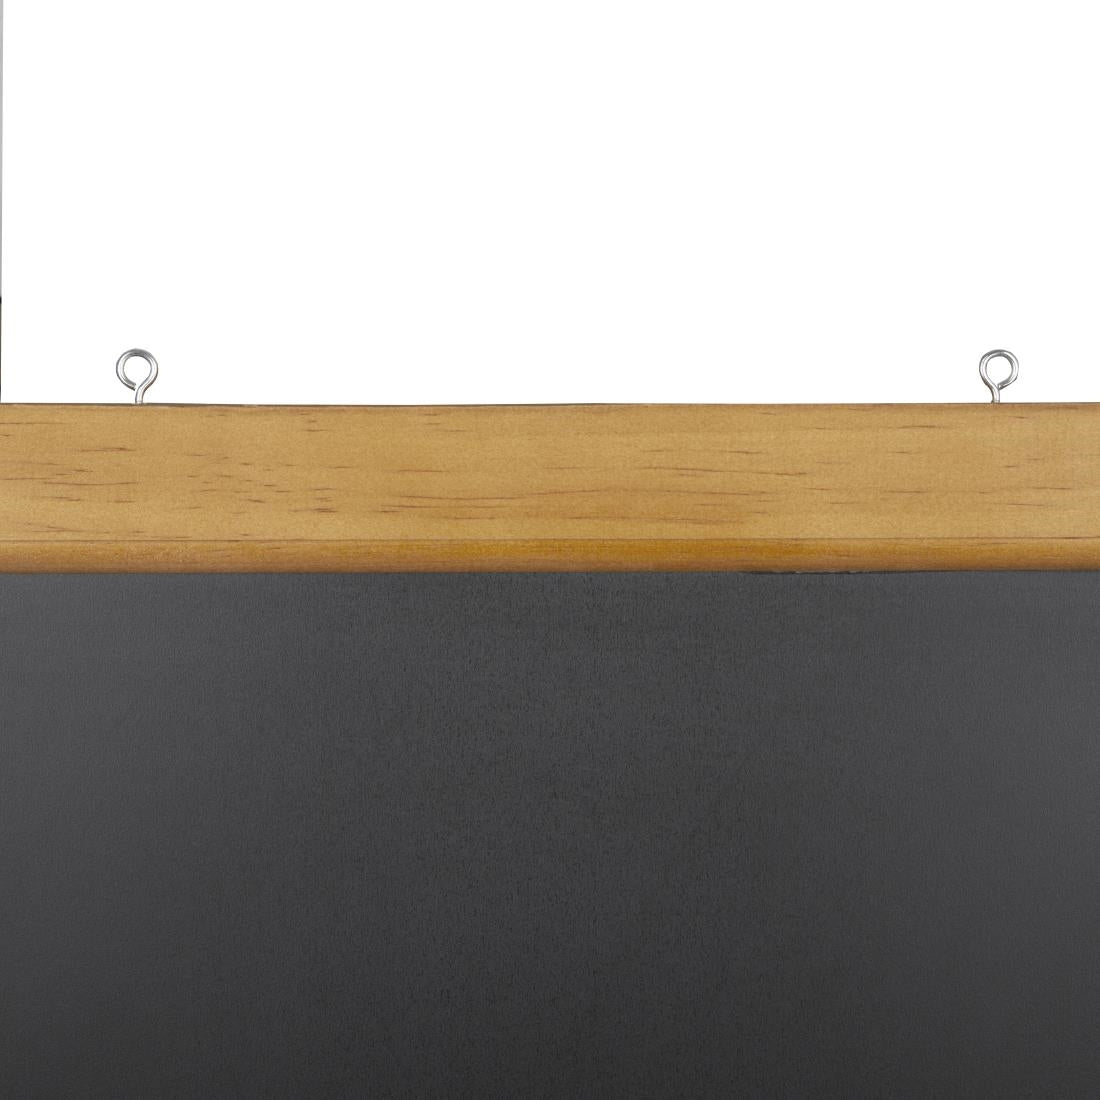 GG107 Olympia Wall Mounted Chalkboard 600 x 800mm JD Catering Equipment Solutions Ltd